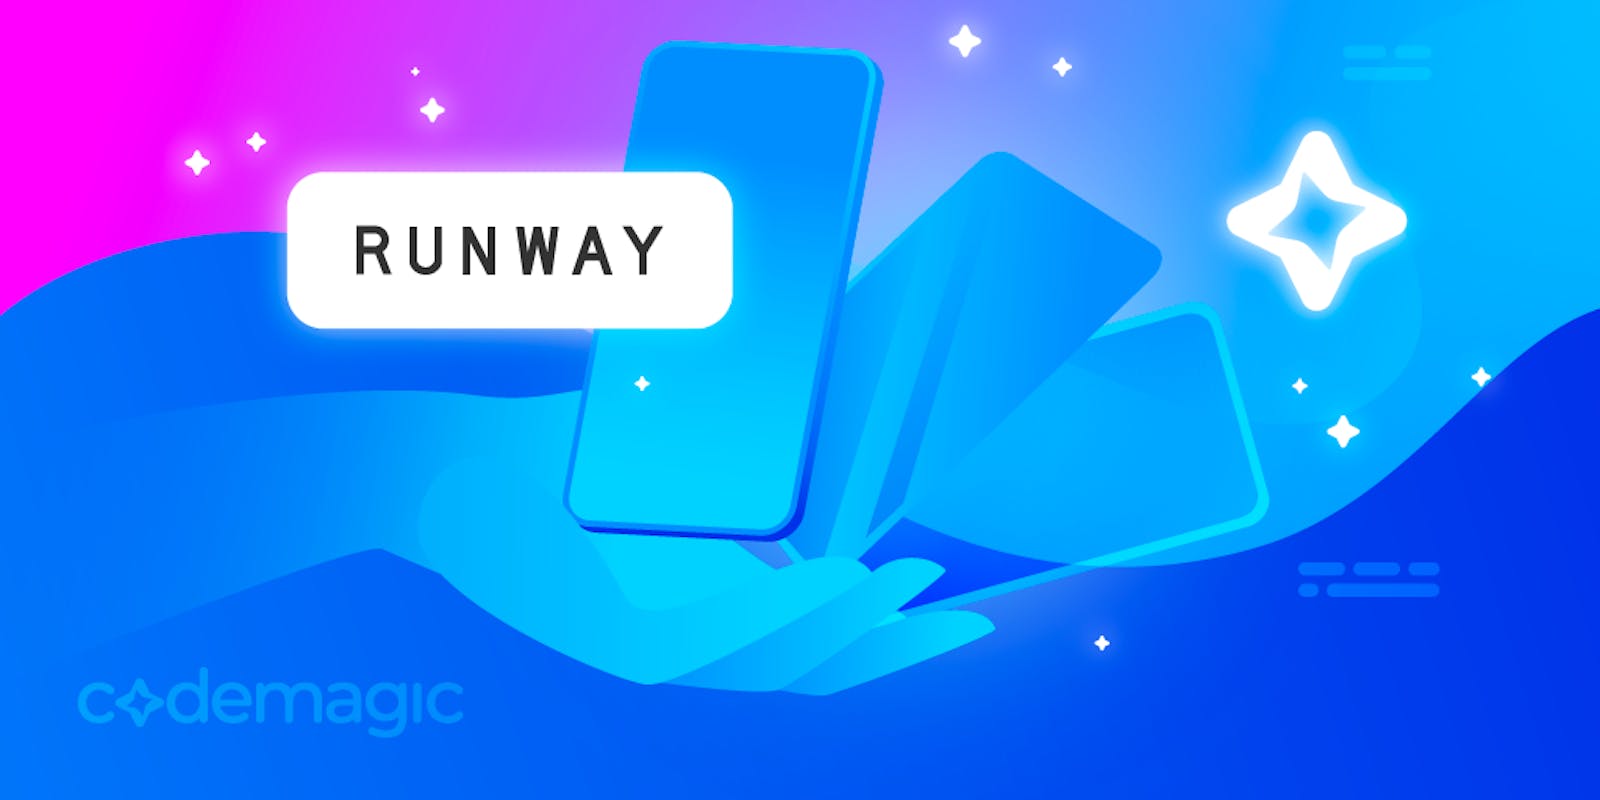 Introducing the official Codemagic integration for Runway